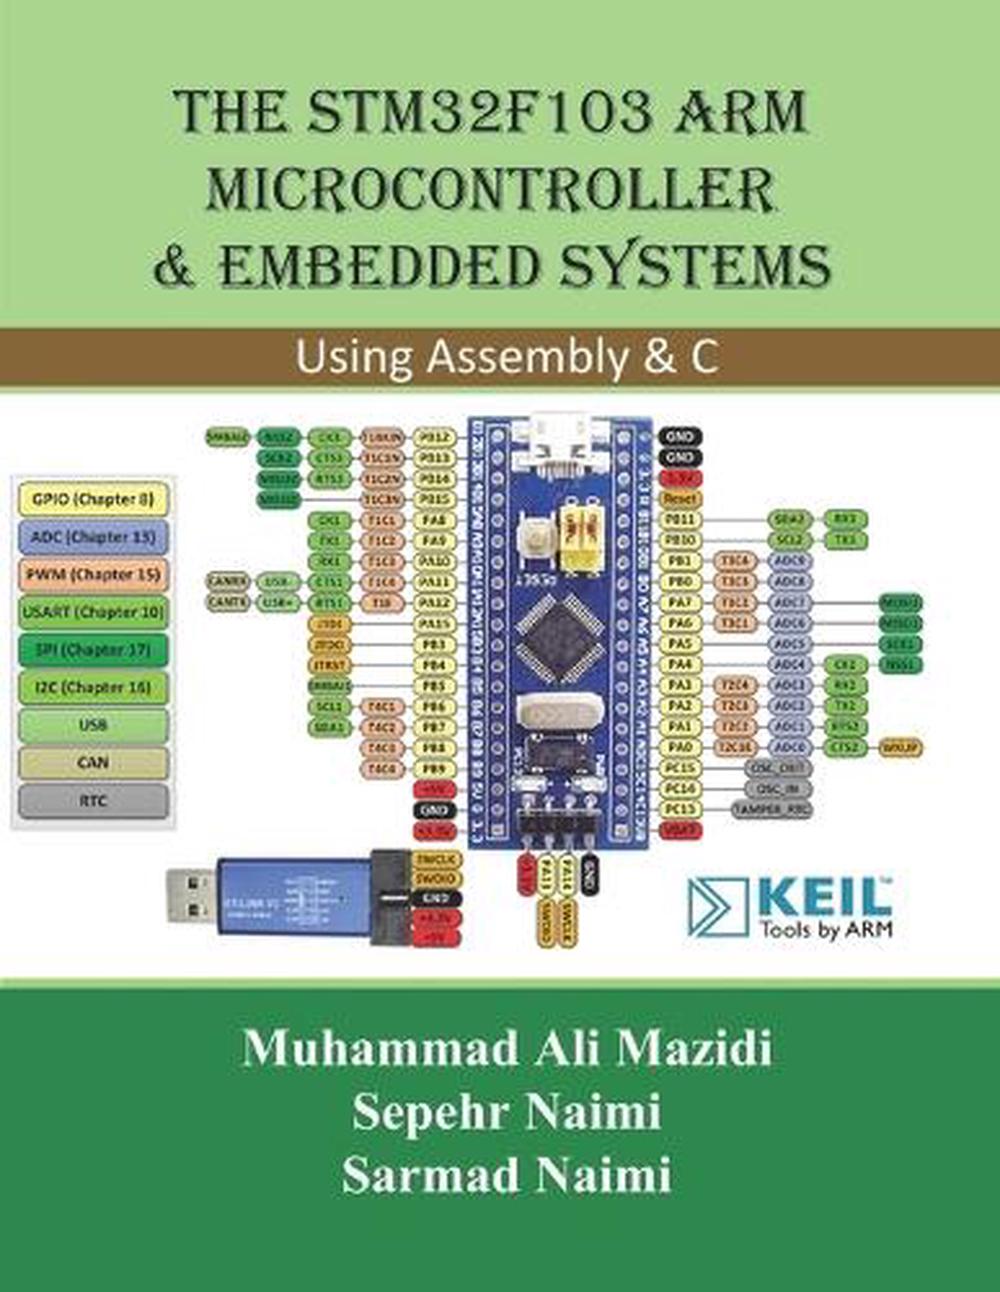 The Stm32f103 Arm Microcontroller And Embedded Systems Using Assembly